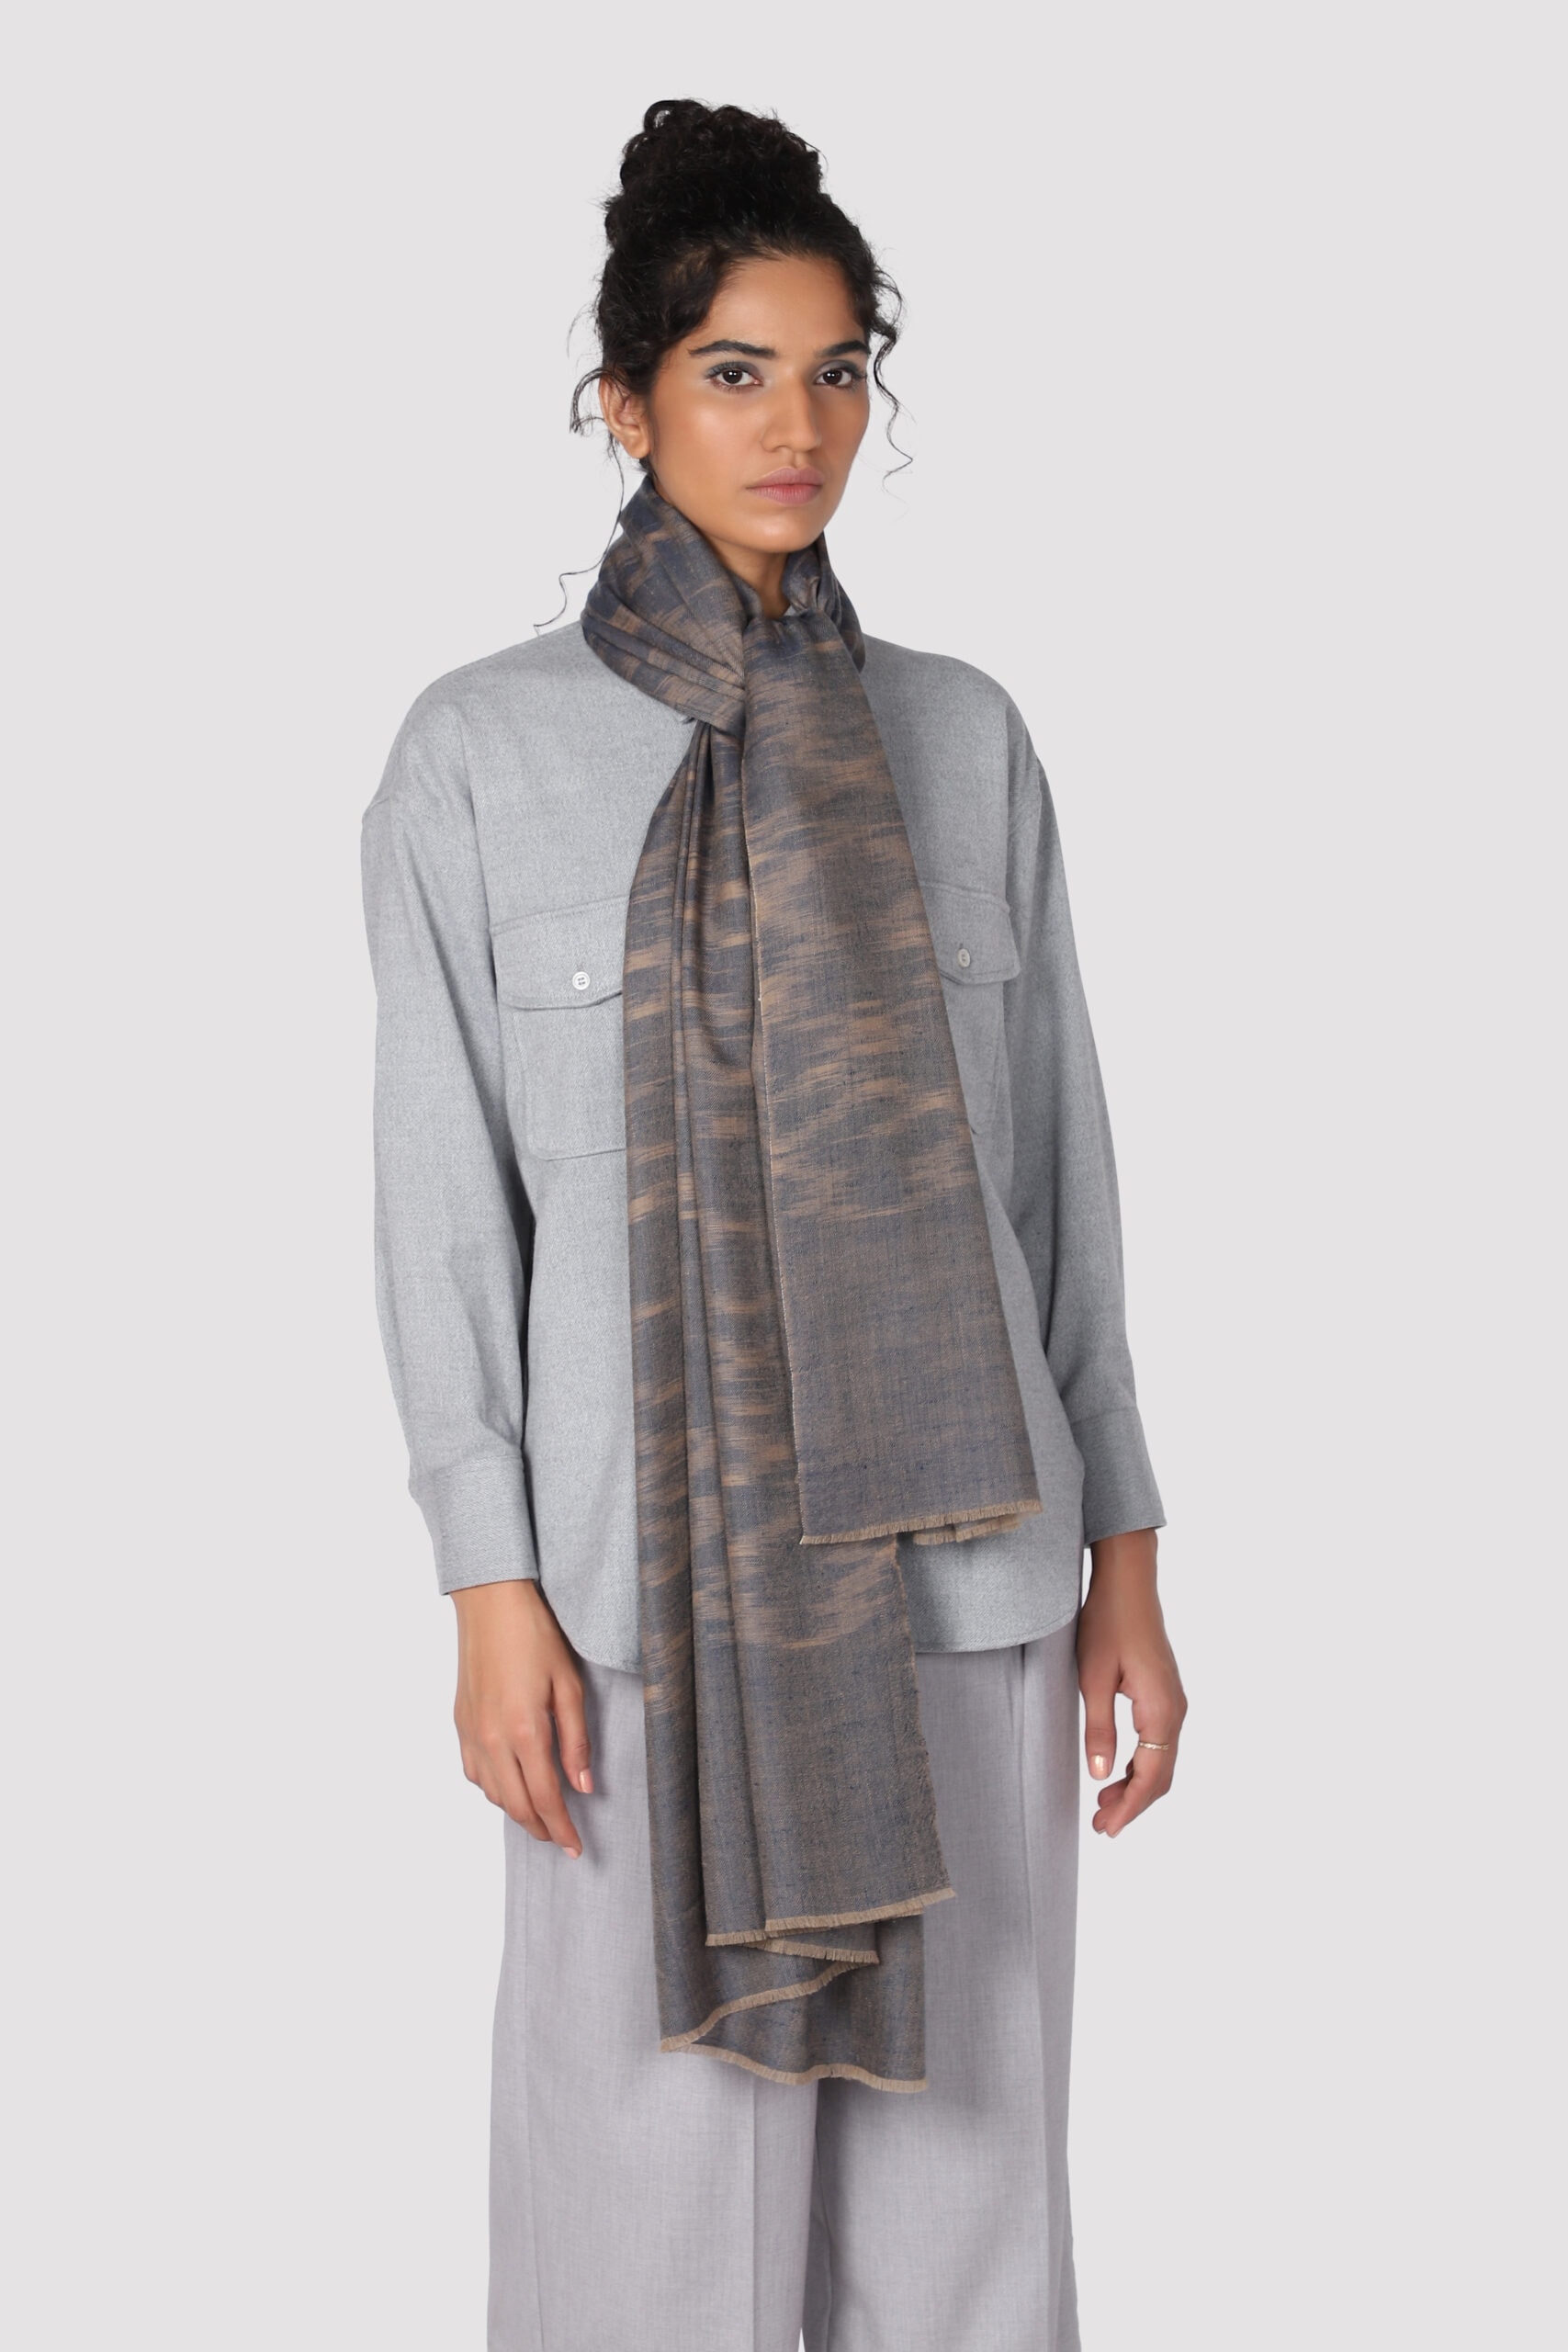 Full frame click of a woman wearing brown & blue colored Ikat cashmere shawl - Me & K